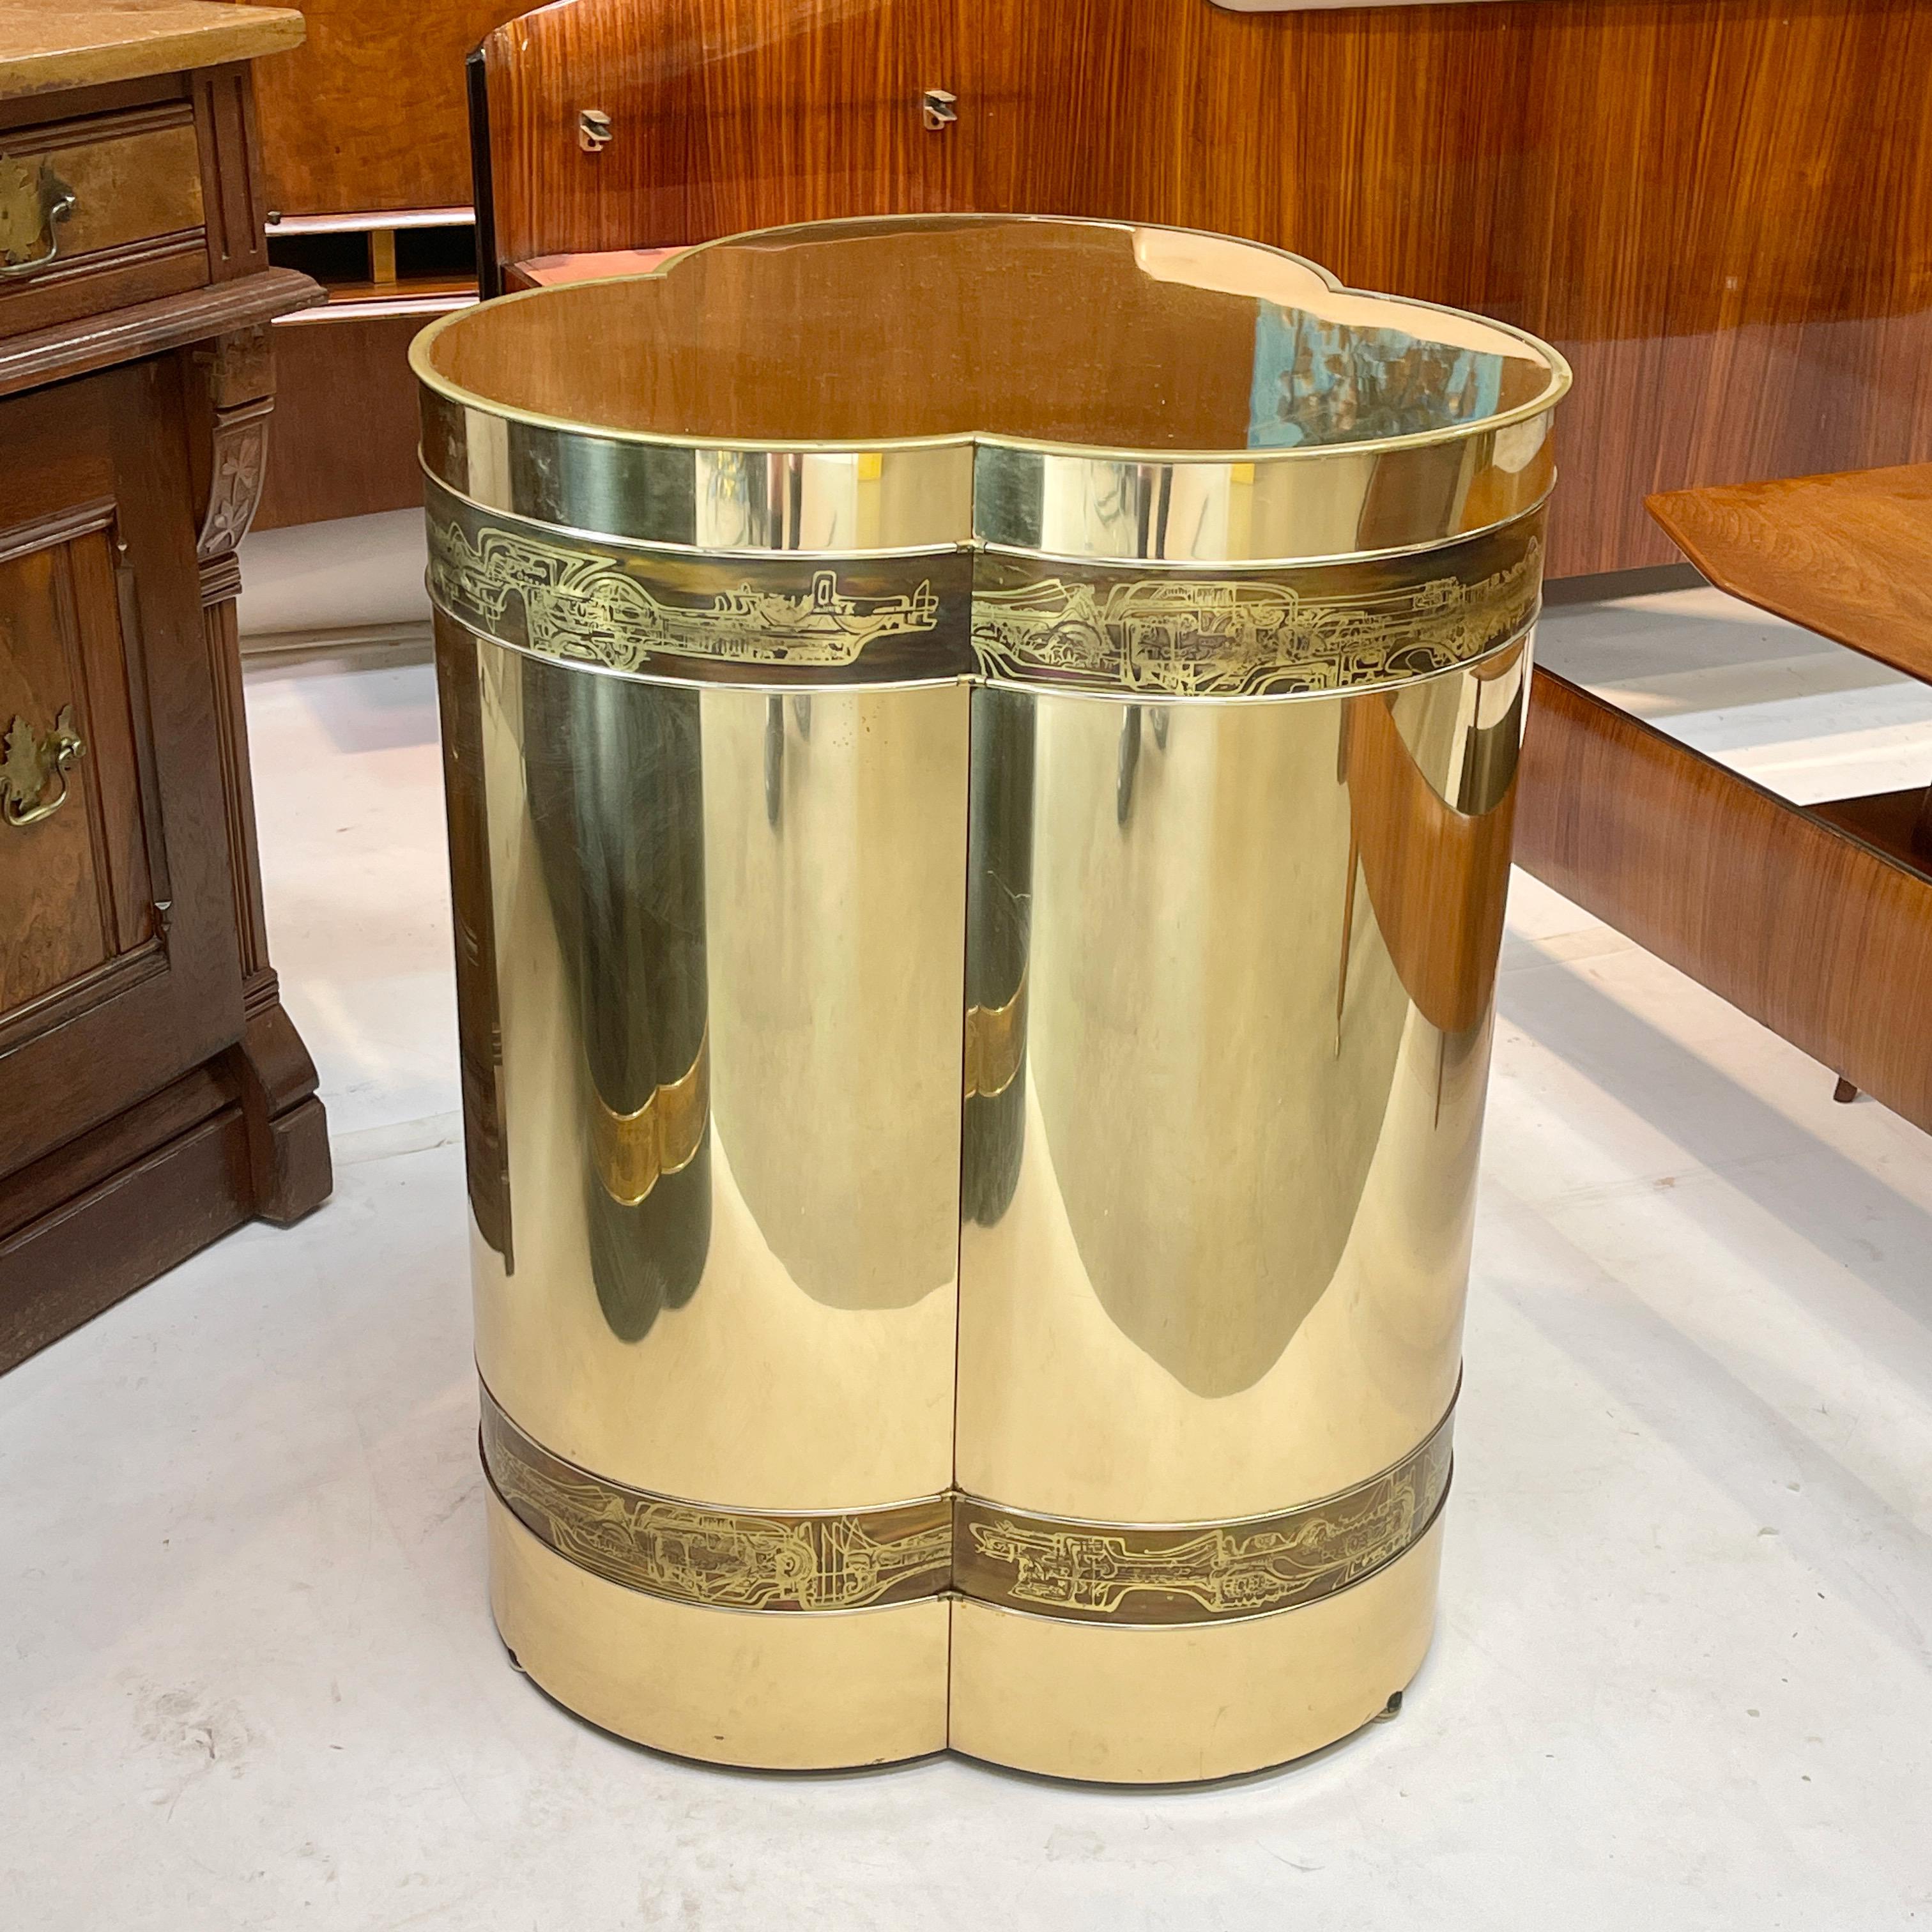 Mastercraft trifoliate form pedestal table base clad in mirror polished and clear lacquered brass sheet with art metal bands of acid etched brass by artist Bernhard Rohne. 
27.5 inches high by 21 inches diameter. 
Per the original Mastercraft